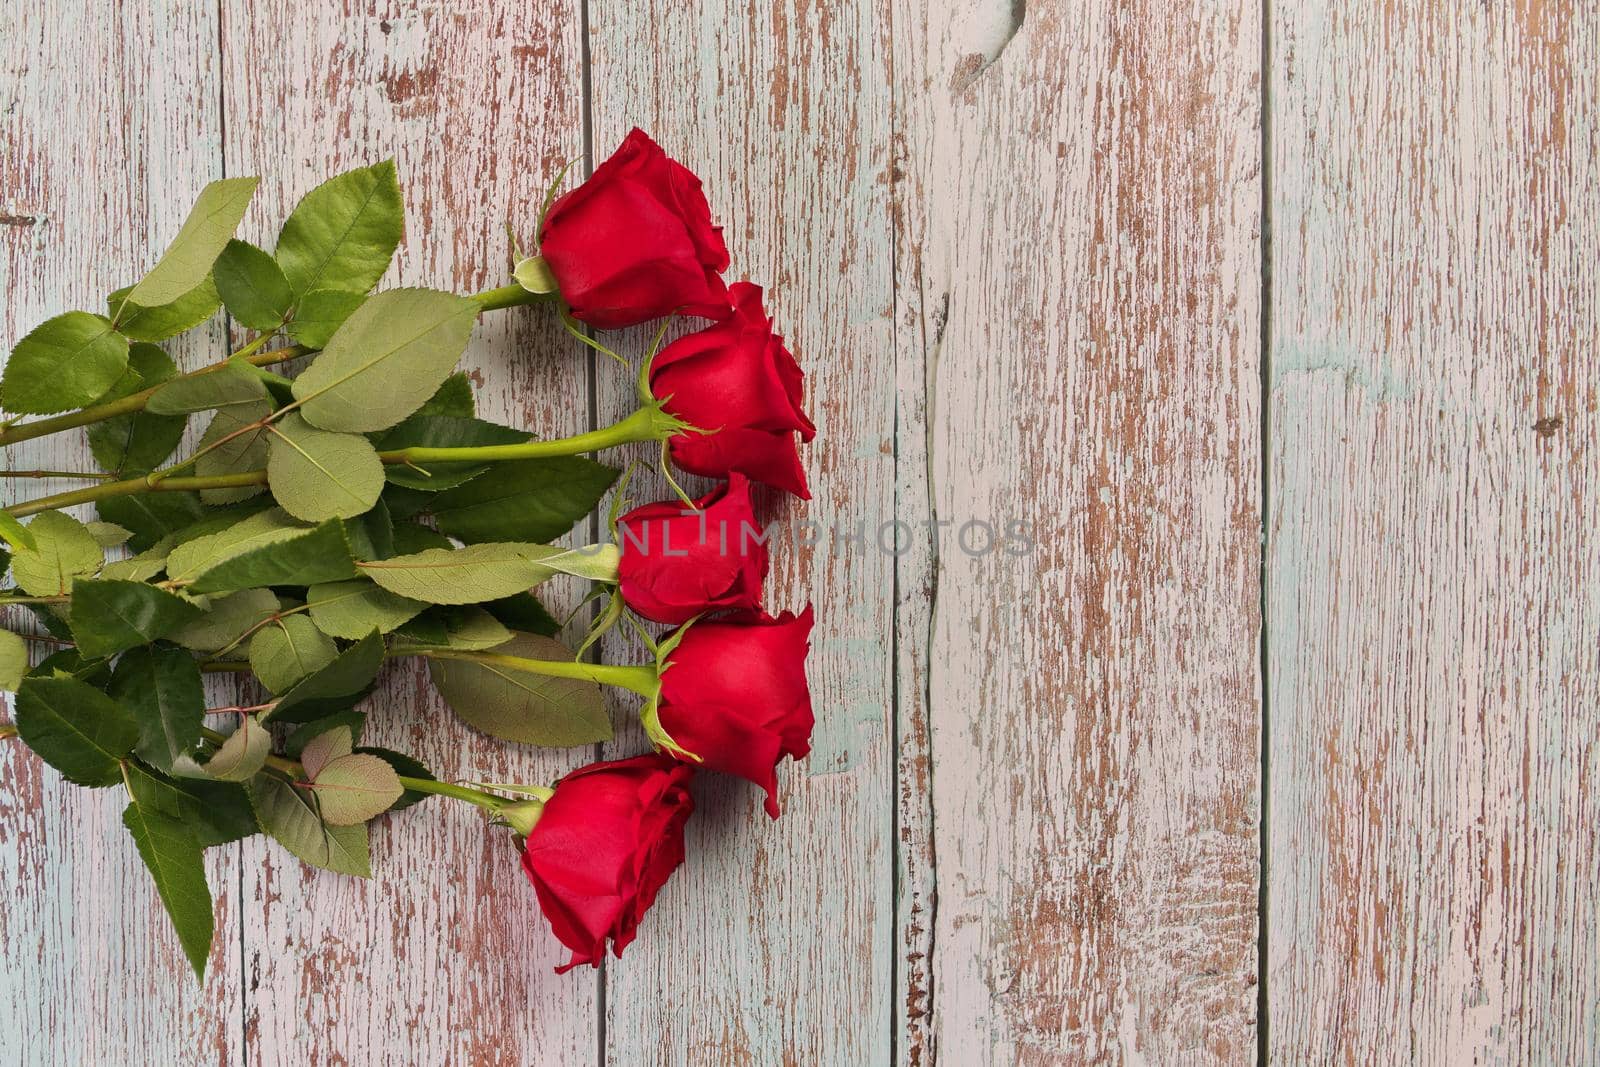 Overhead View of Red Roses on Rustic Wood Table by markvandam